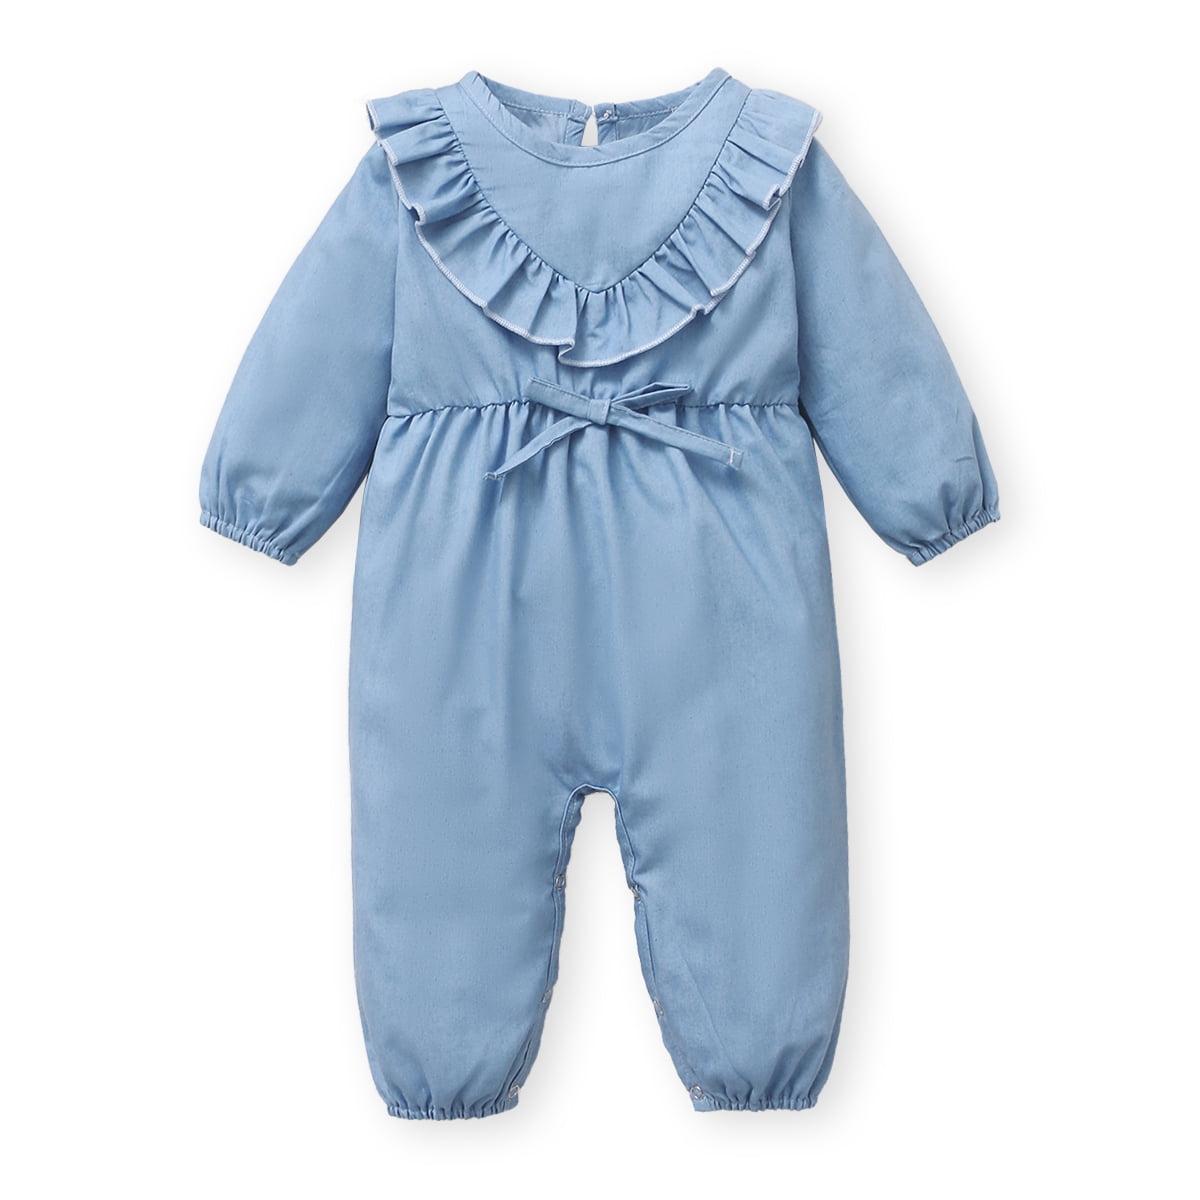 NEW BABY ROMPER Sz Prem 0 3 6 9 12 18 24 mths GEORGE One-Piece COVERALL ROMPER 